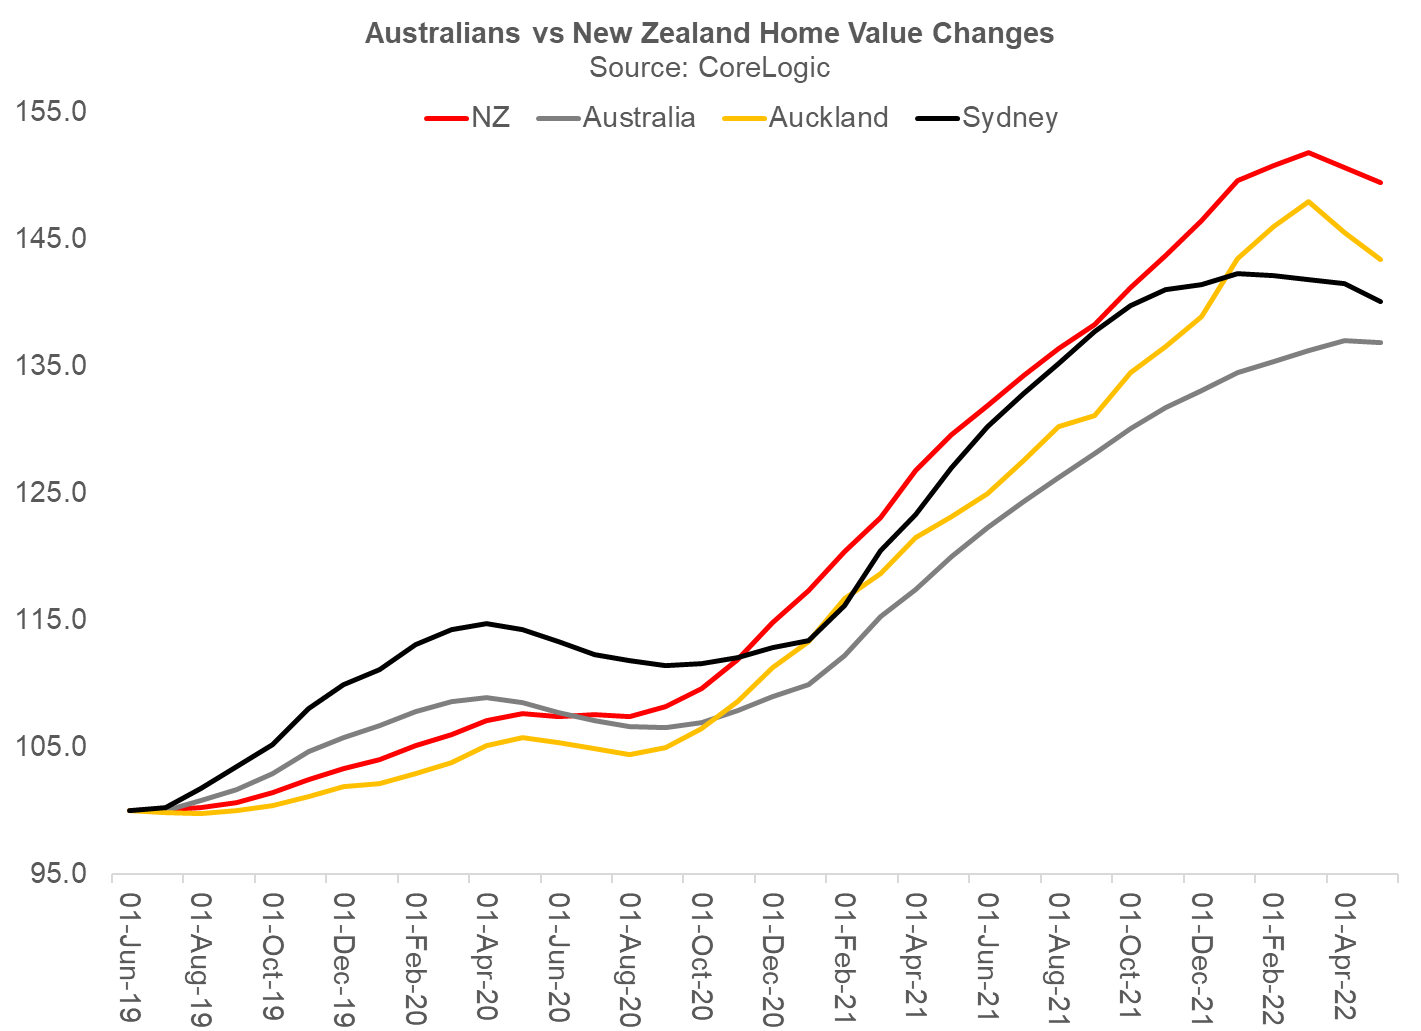 NZ house prices have only fallen modestly thus far